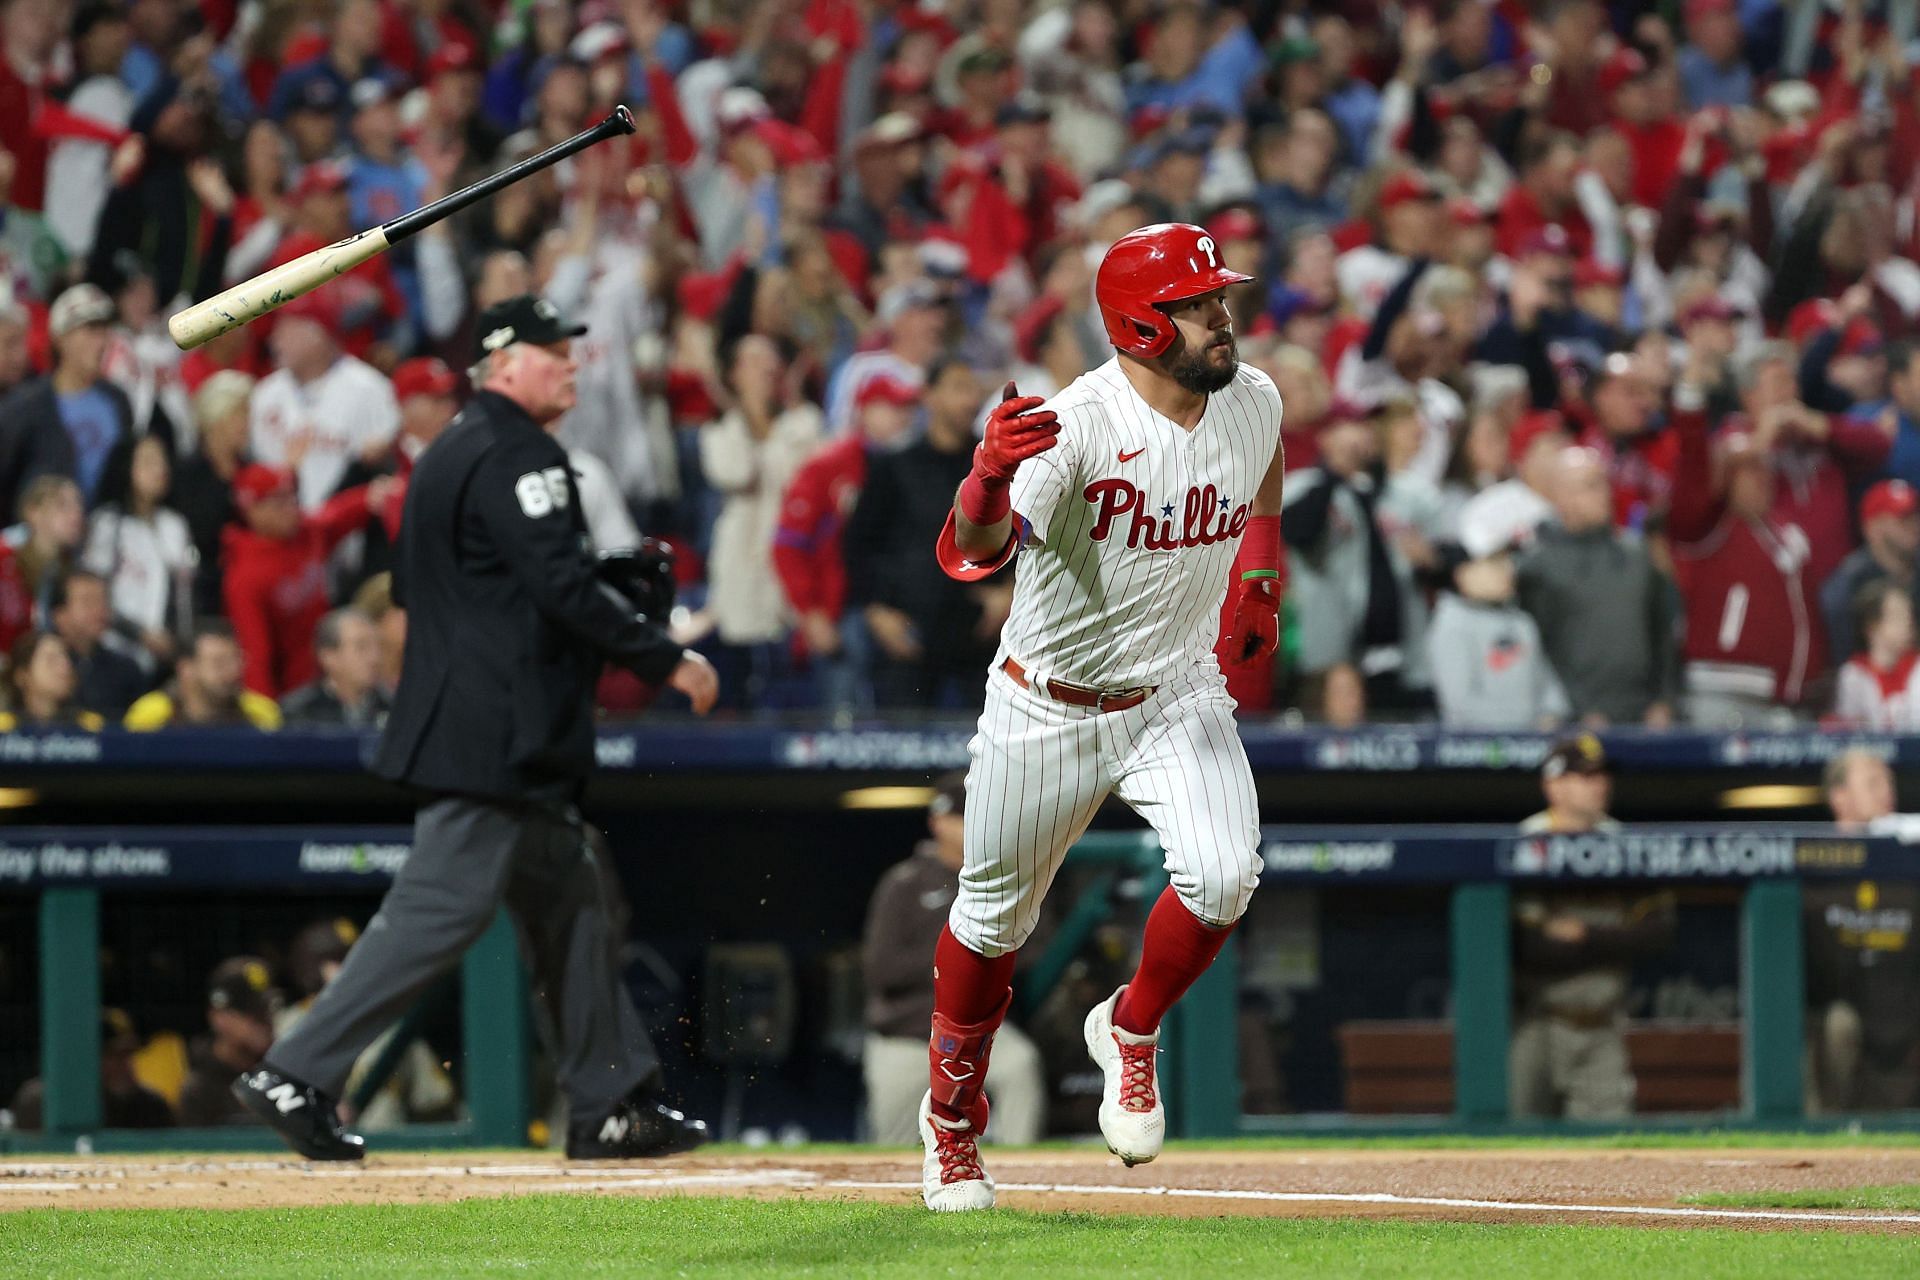 Schwarber, Hall help Phillies rout Braves 14-4 - NBC Sports